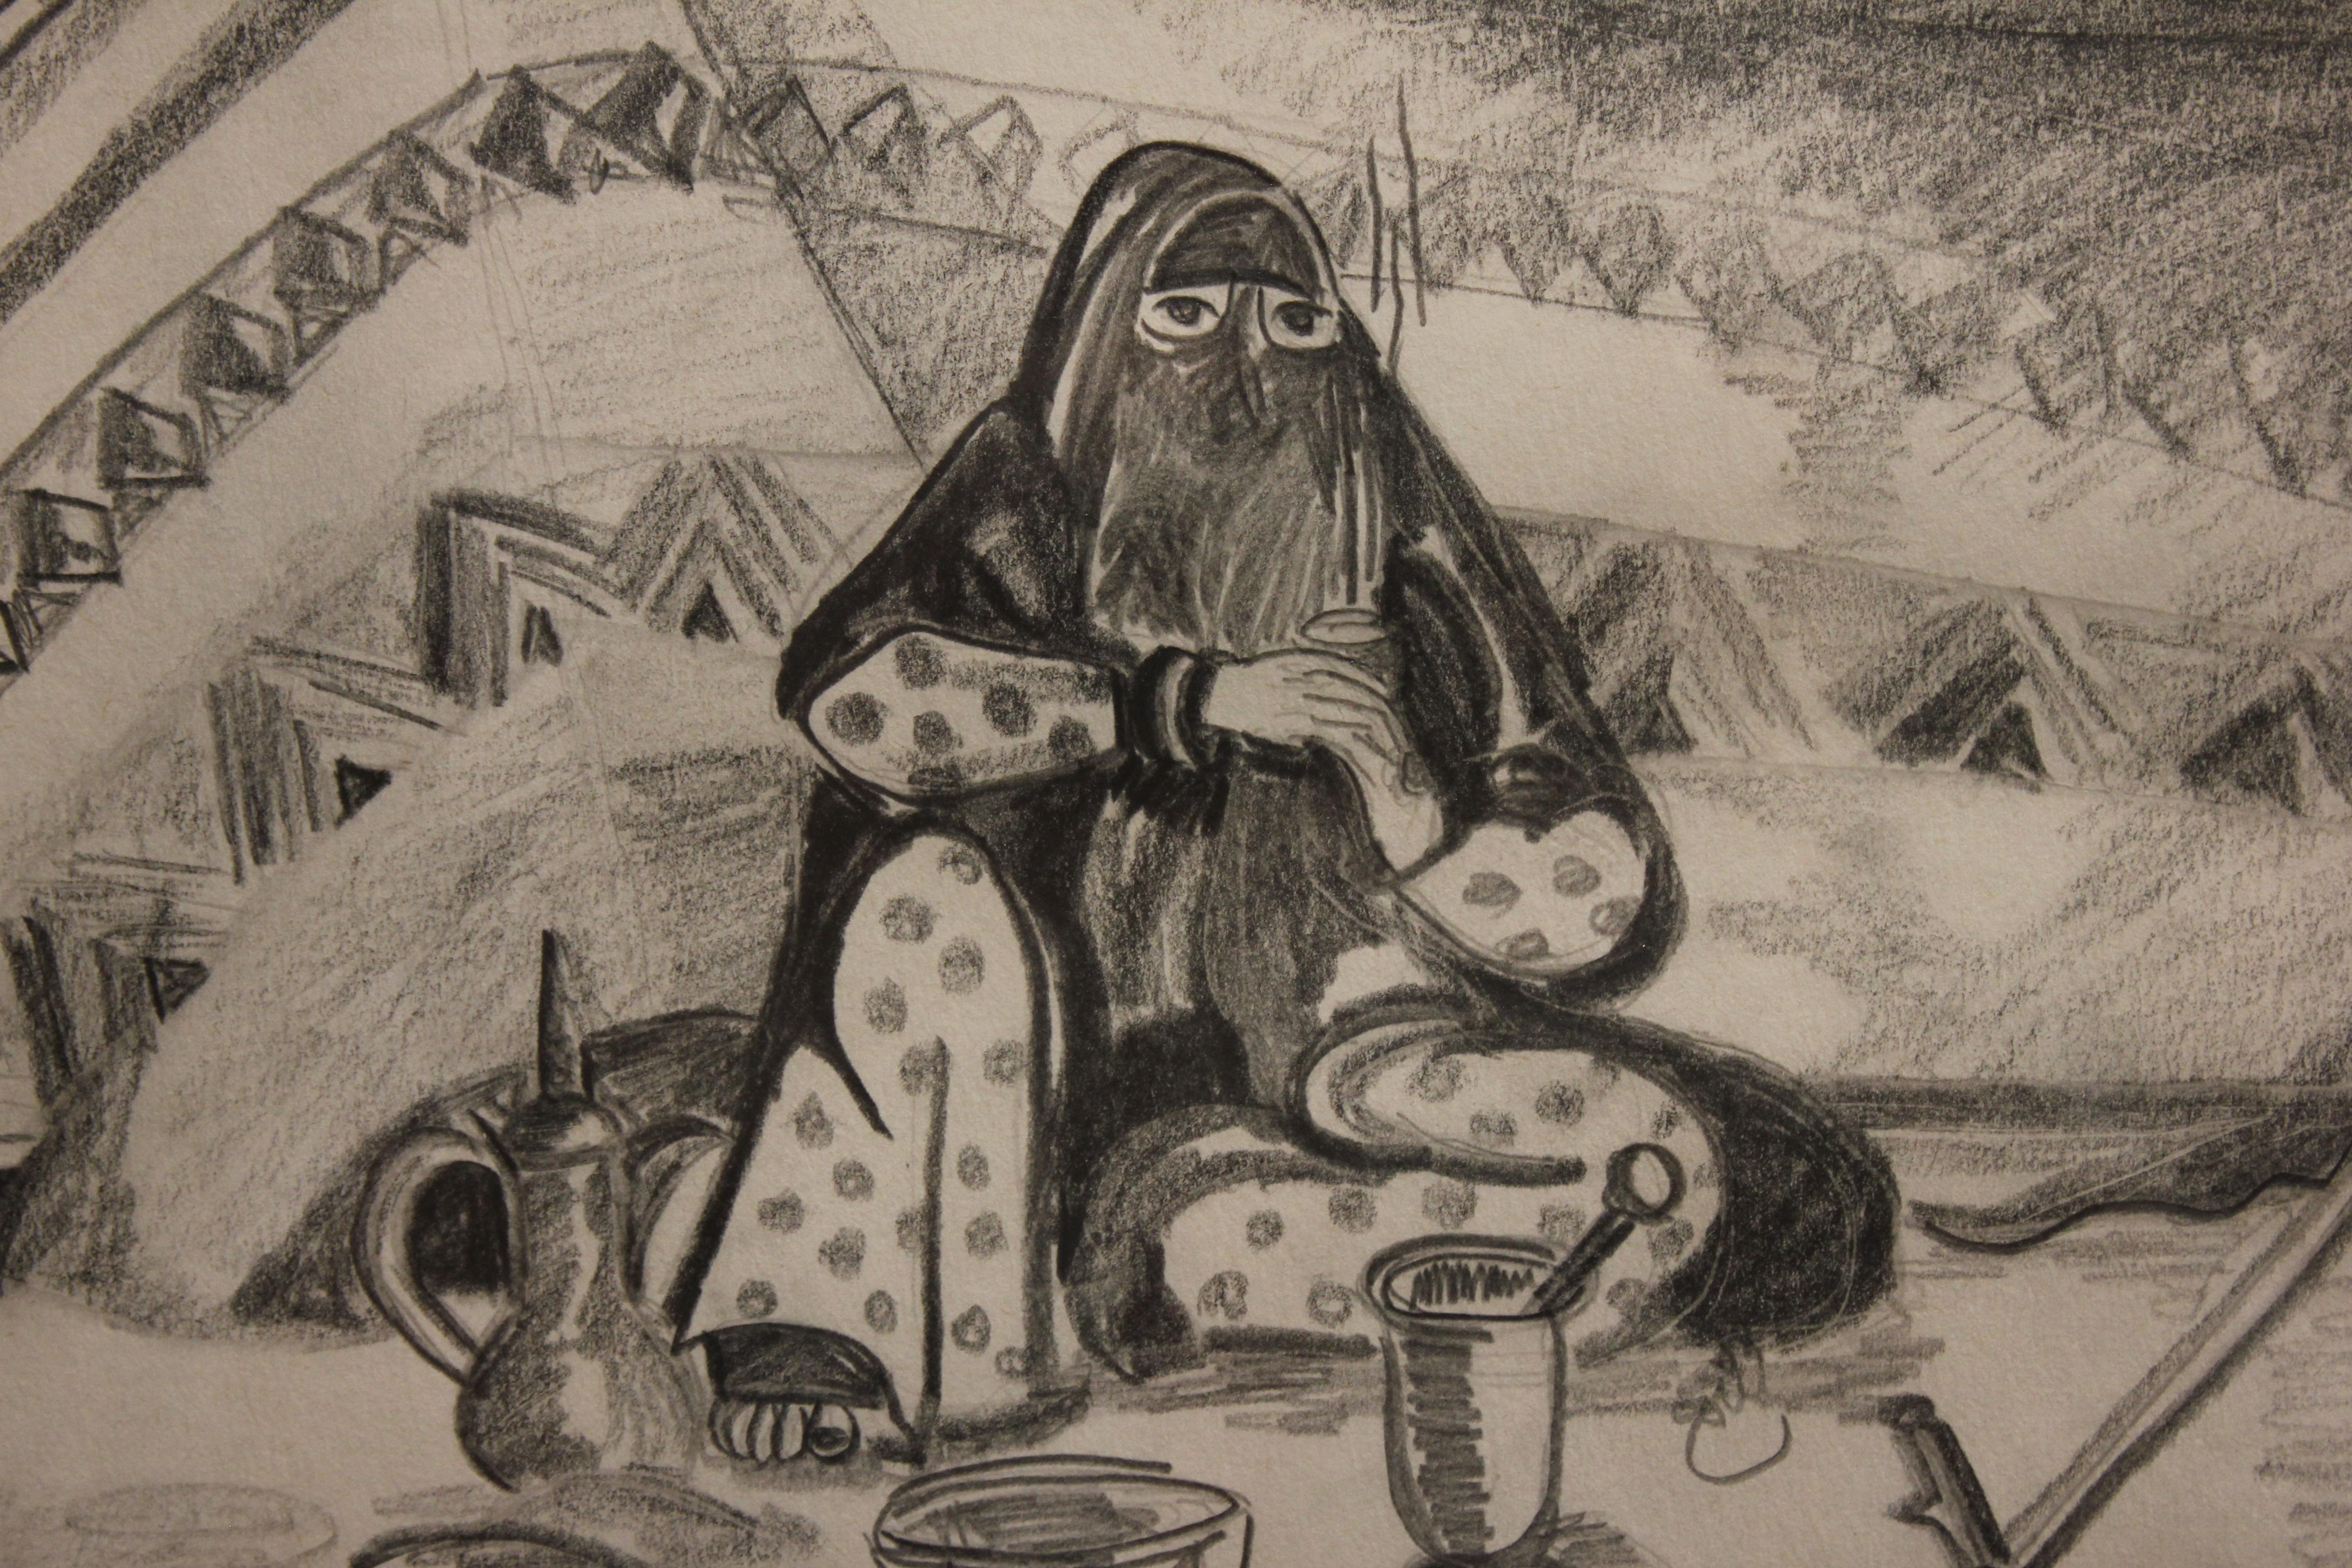 Monochromatic Sketch of a Woman in a Hijab by a Tent - Art by Shama Asghar